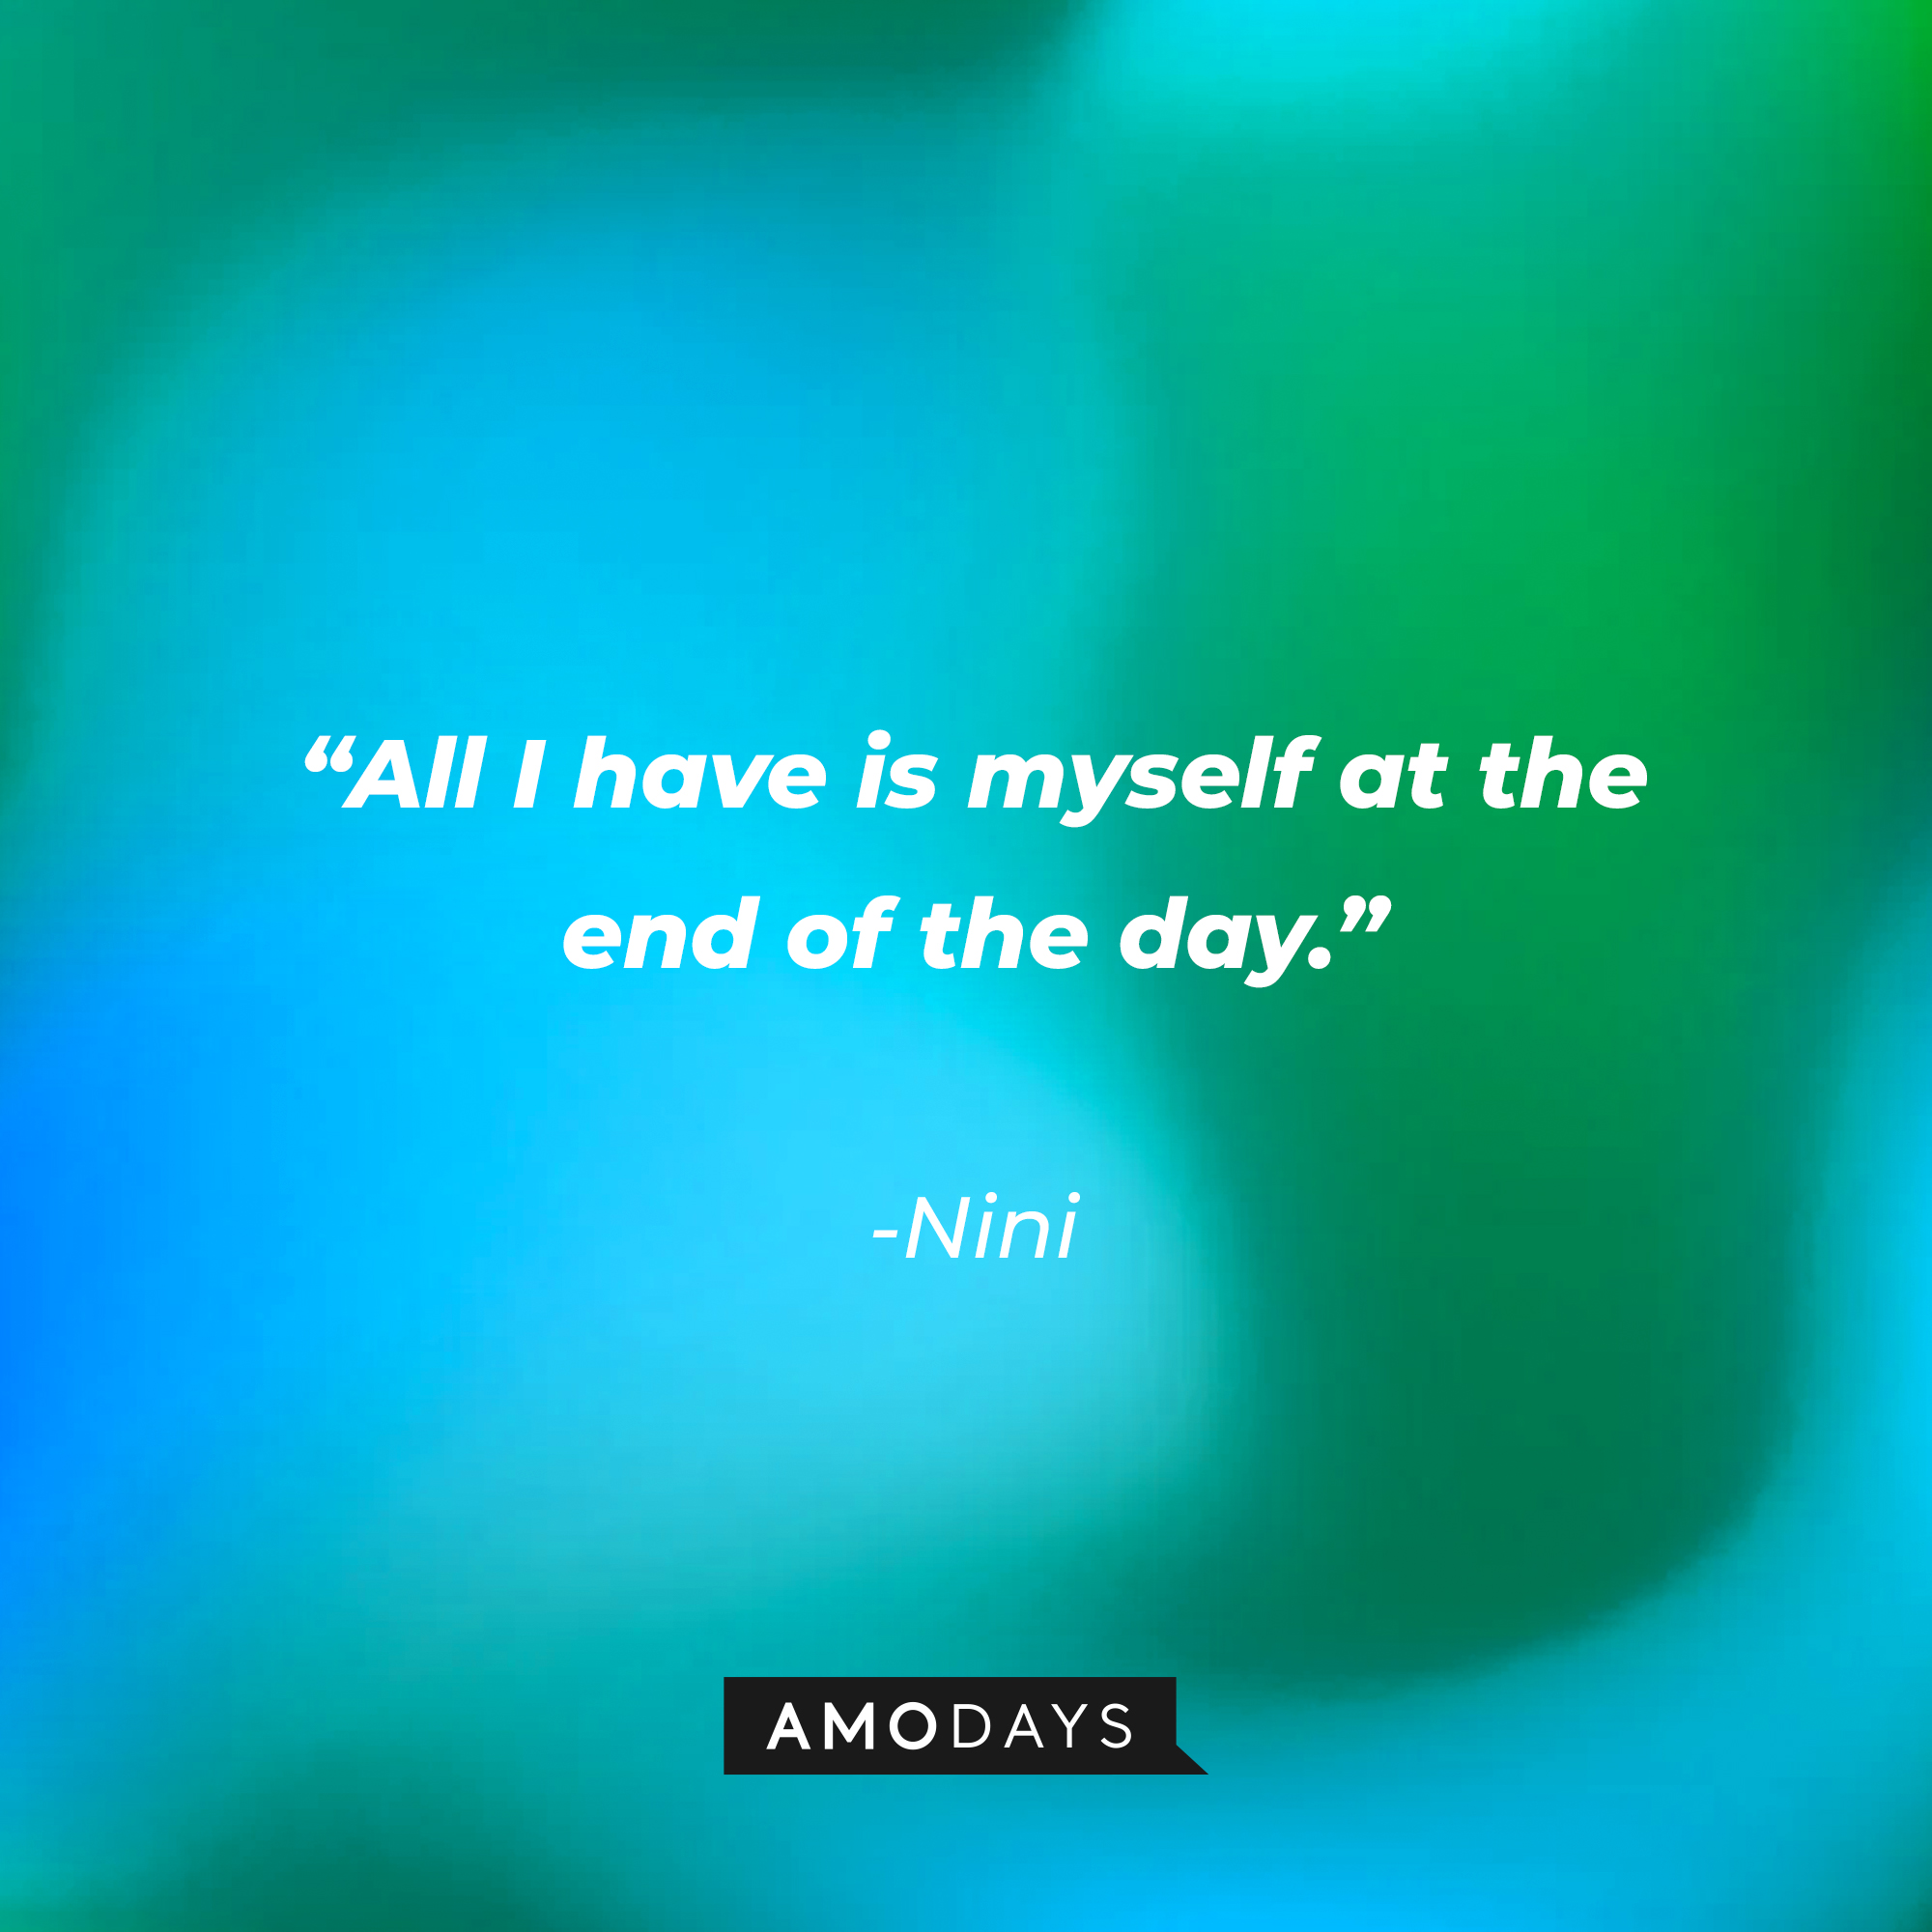 Nini’s quote: "All I have is myself at the end of the day." | Source: AmoDays